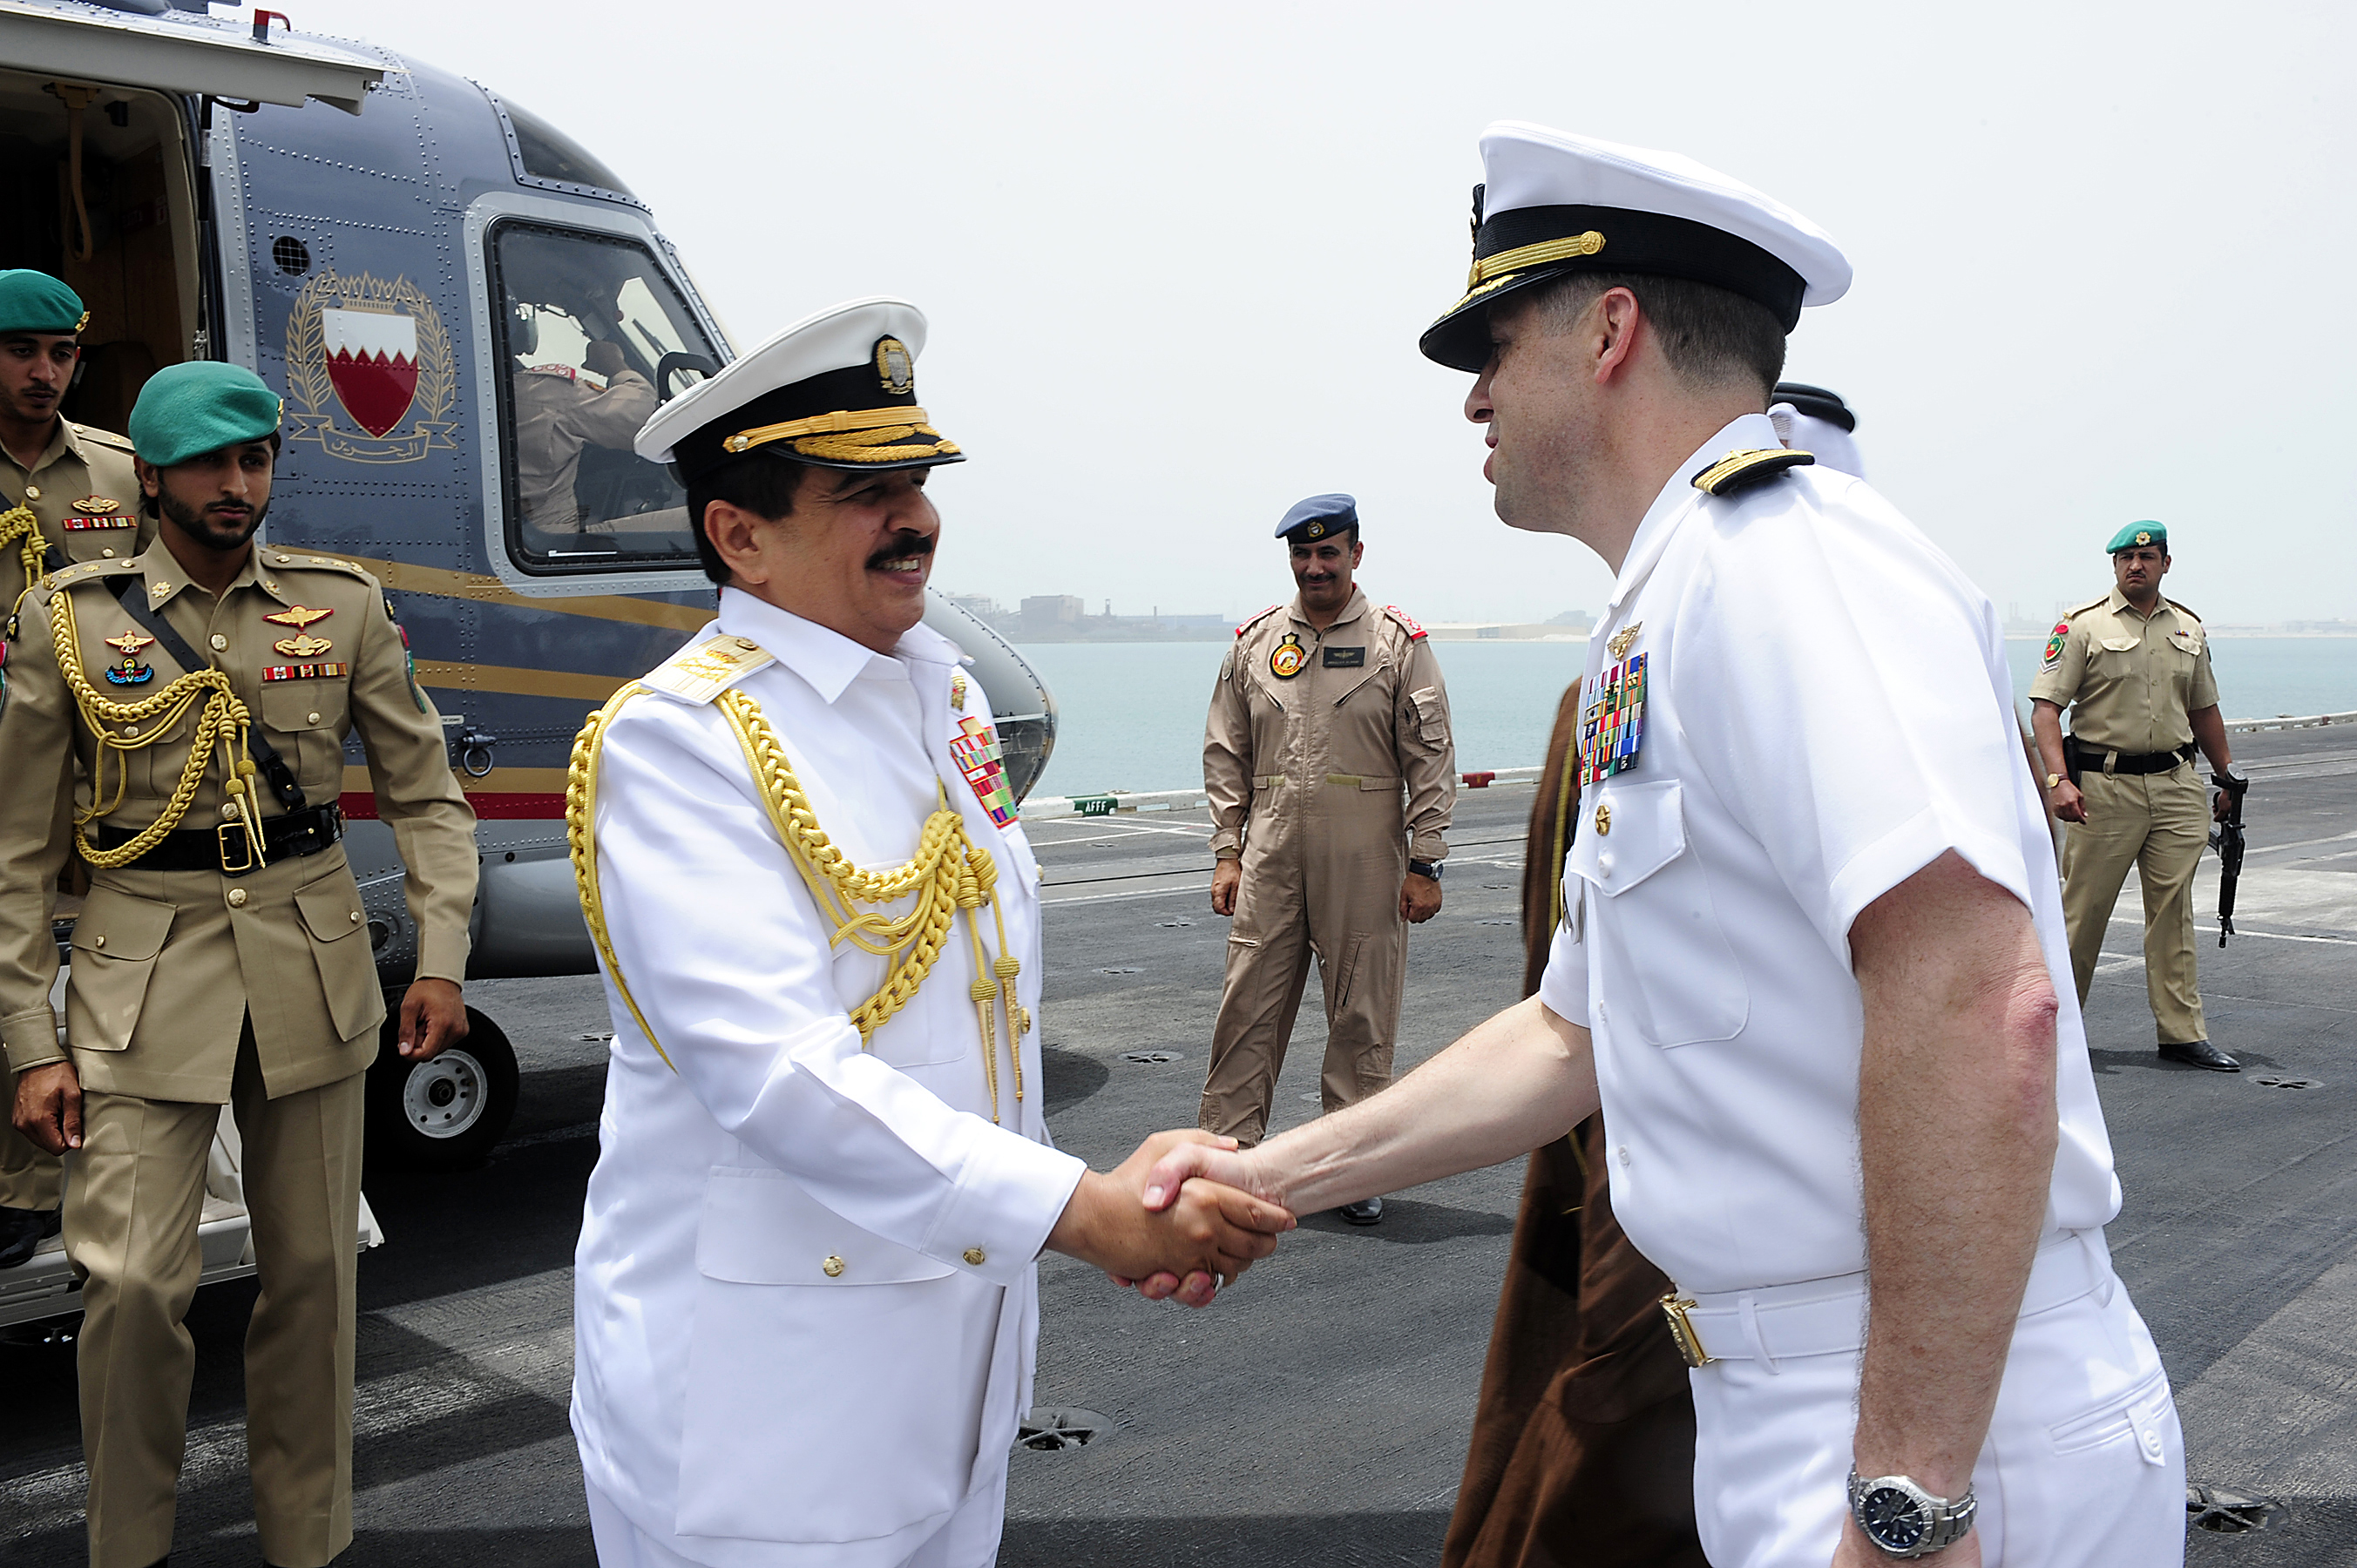 Captain Ted R. Williams, executive officer of the aircraft carrier USS Dwight D. Eisenhower (CVN 69), welcomes the King of Bahrain, His Majesty the King Hamad bin Isa al-Khalifa, to Dwight D. Eisenhower during an historic port visit to the Kingdom of Bahrain, Arabian Sea, May 17, 2009.